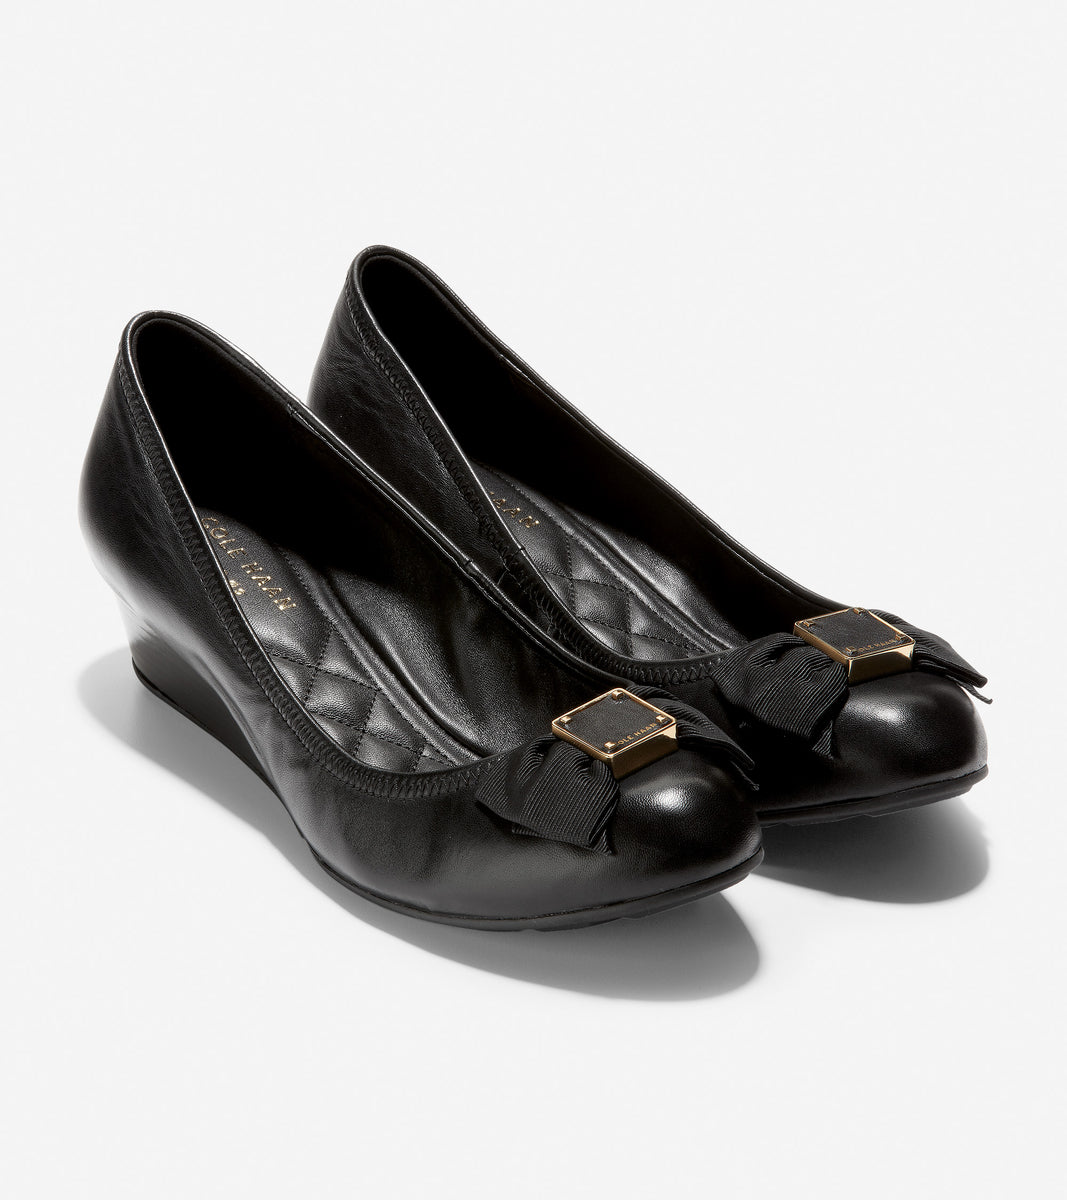 ColeHaan-Tali Soft Bow Wedge-w11798-Black Leather